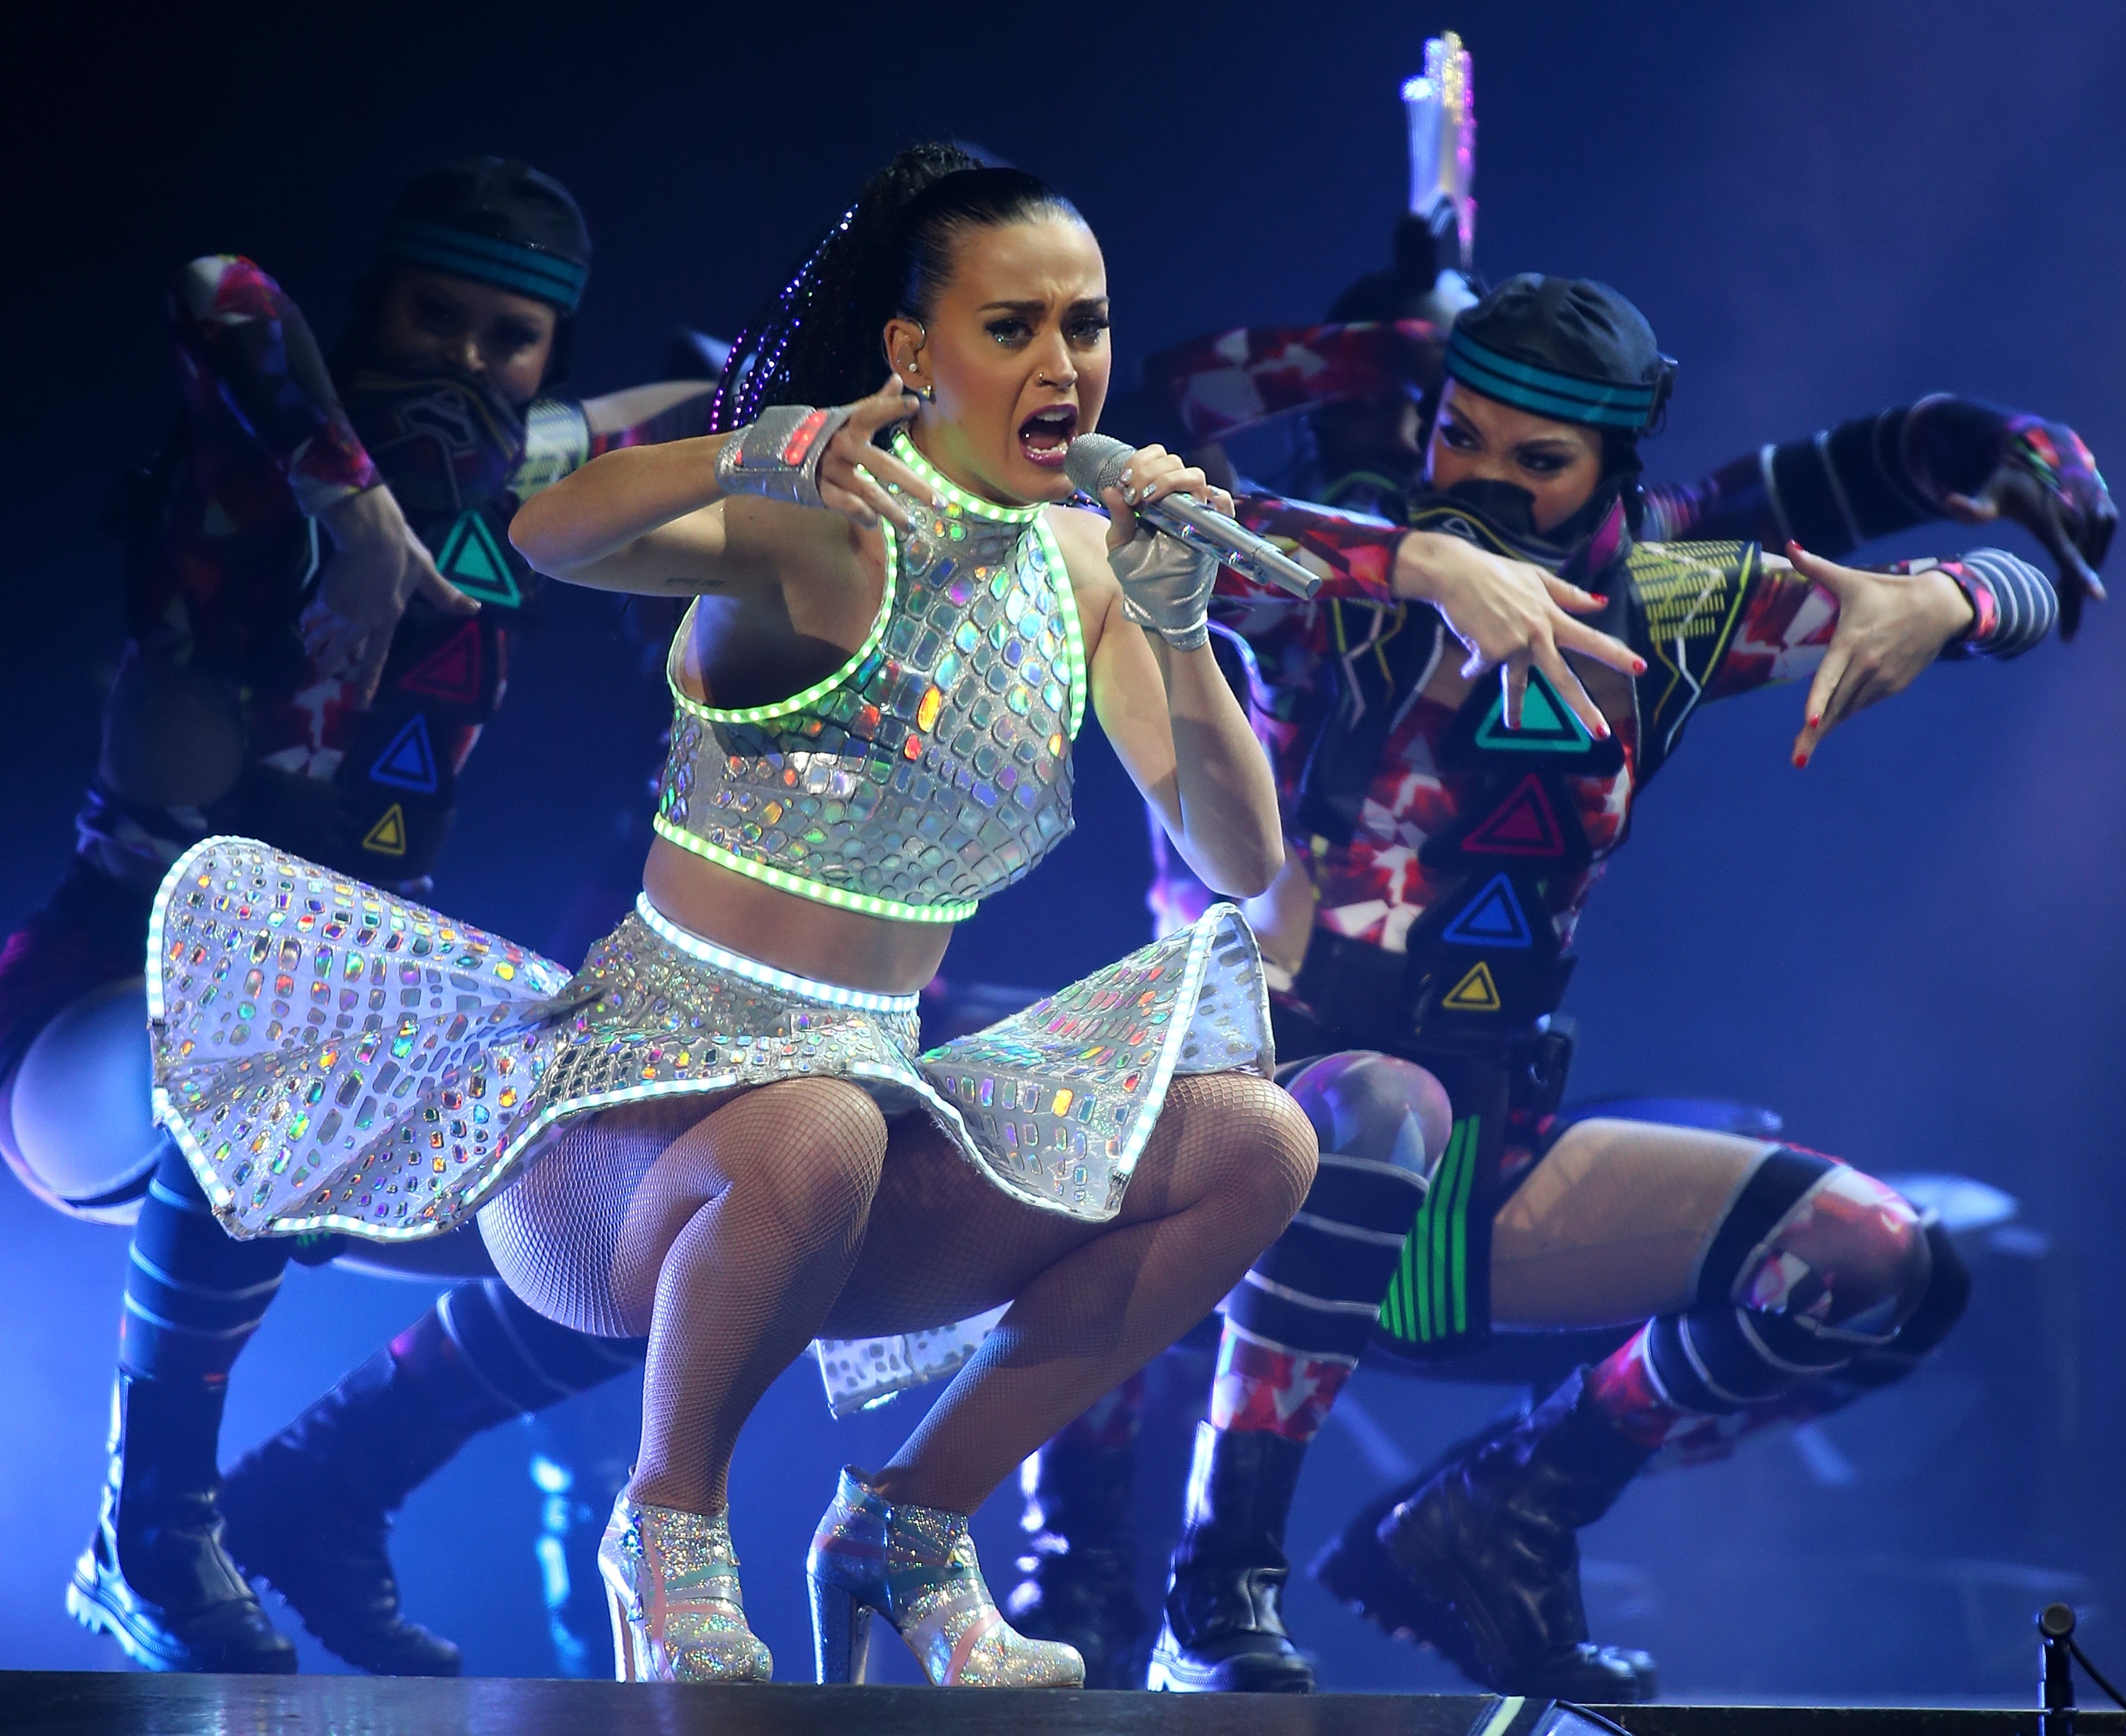 Katy Perry 2014 : Katy Perry – Prismatic World Tour 2014 in Perth -04